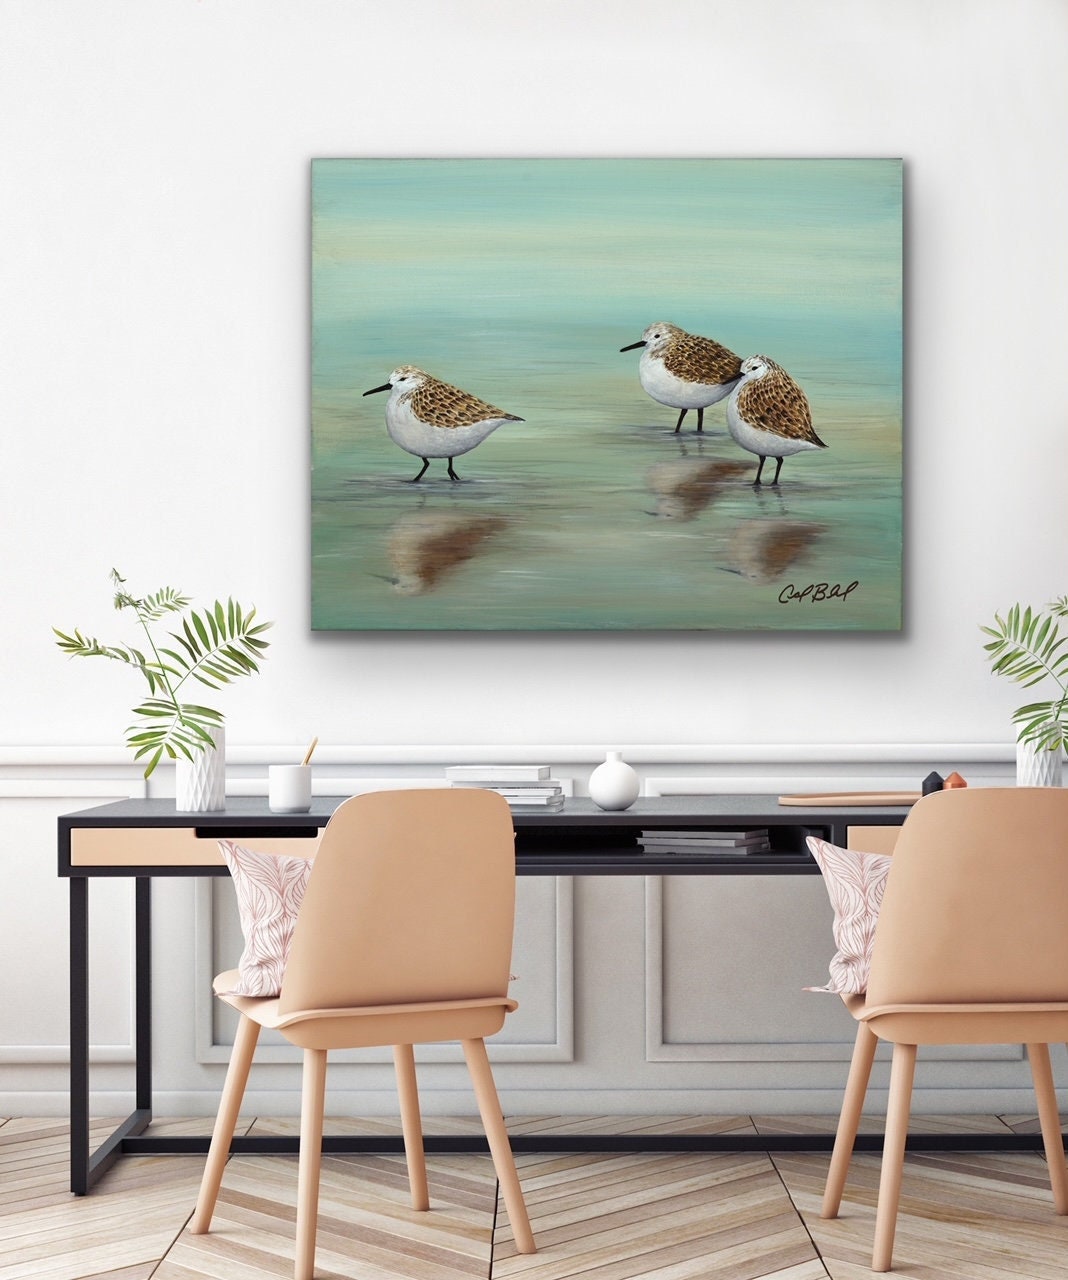 To the Rhythm of the Shore: Giclee Print on Canvas Painting - Etsy